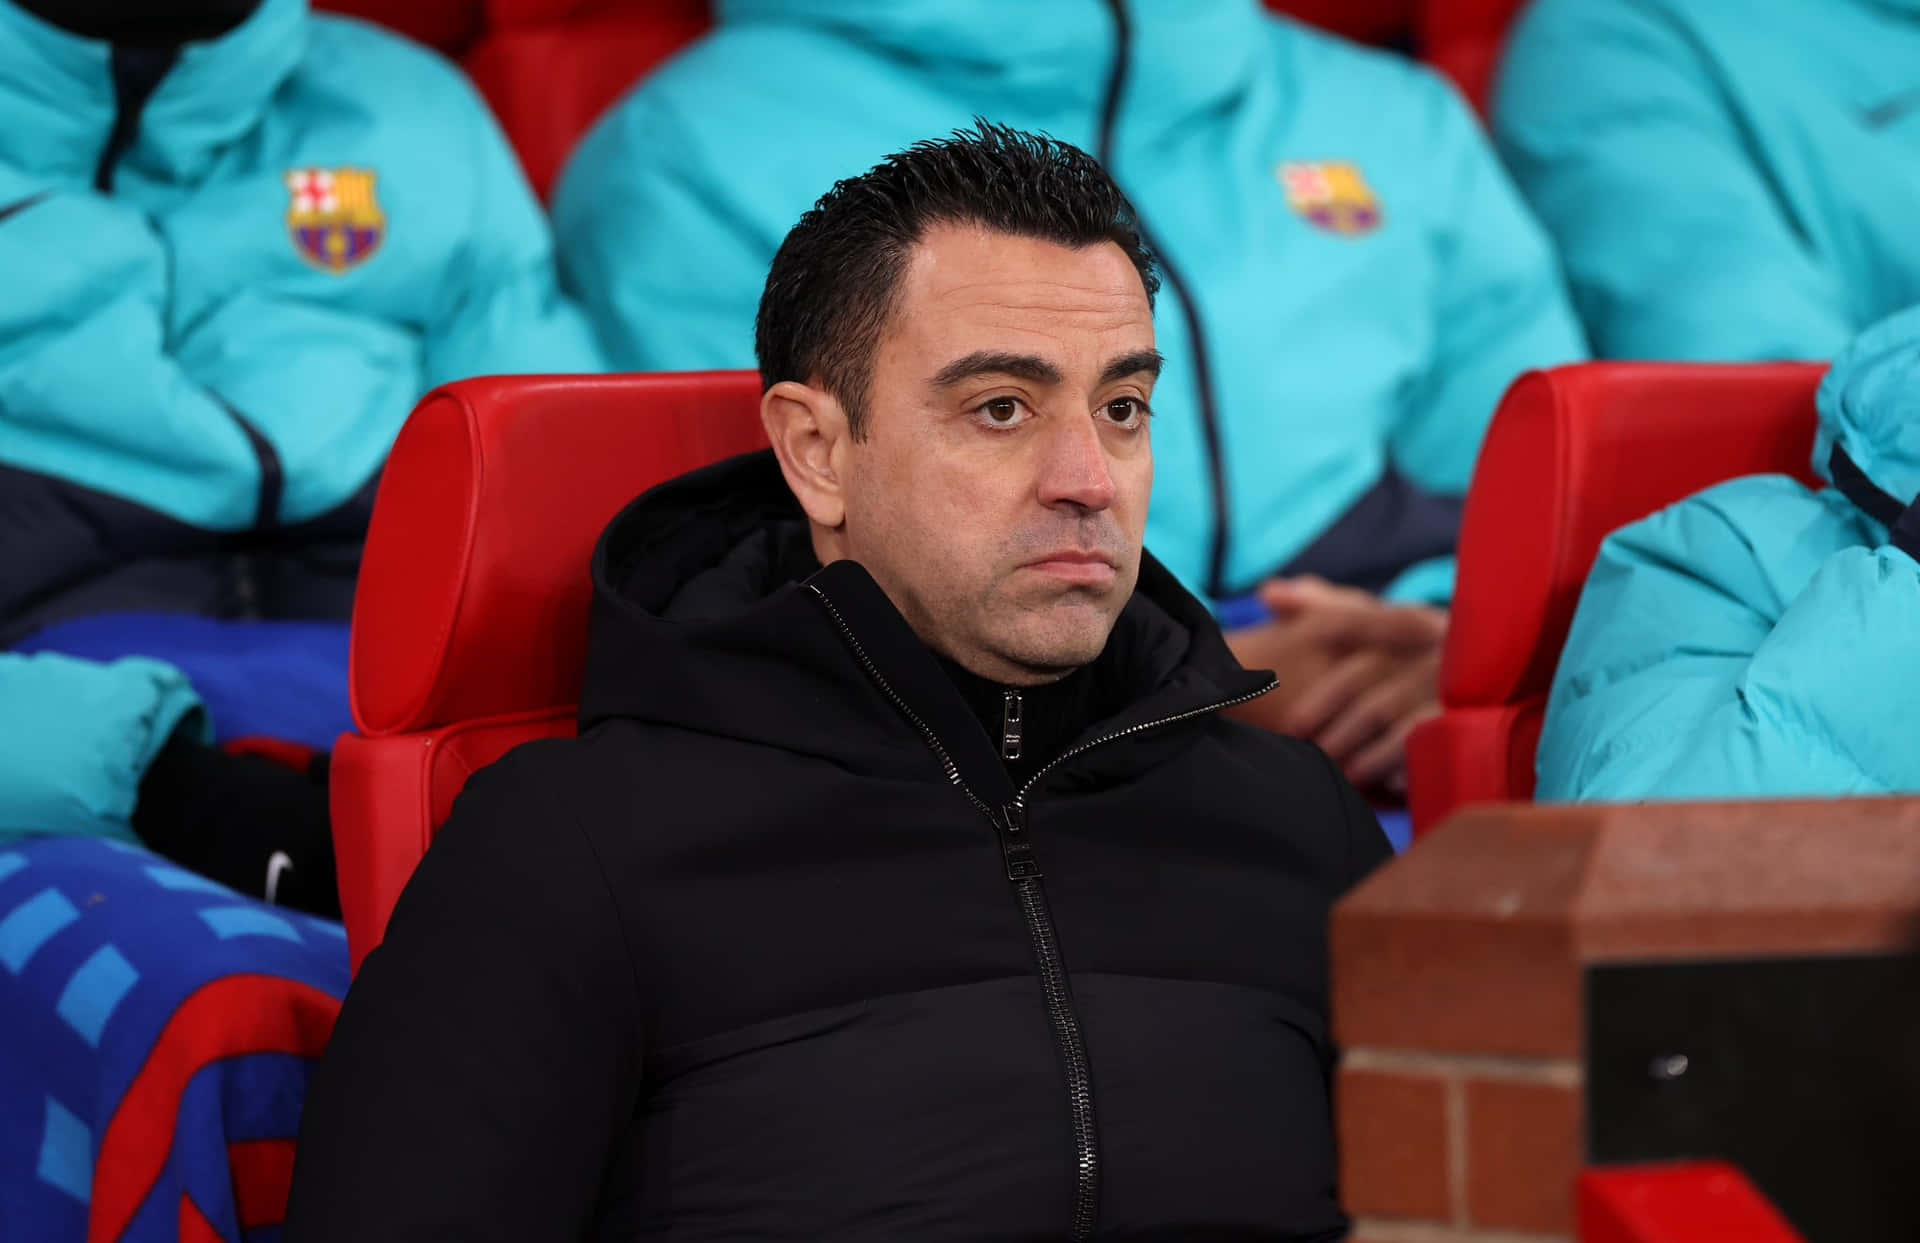 Xavi Hernandez Concentrated During Match Wallpaper